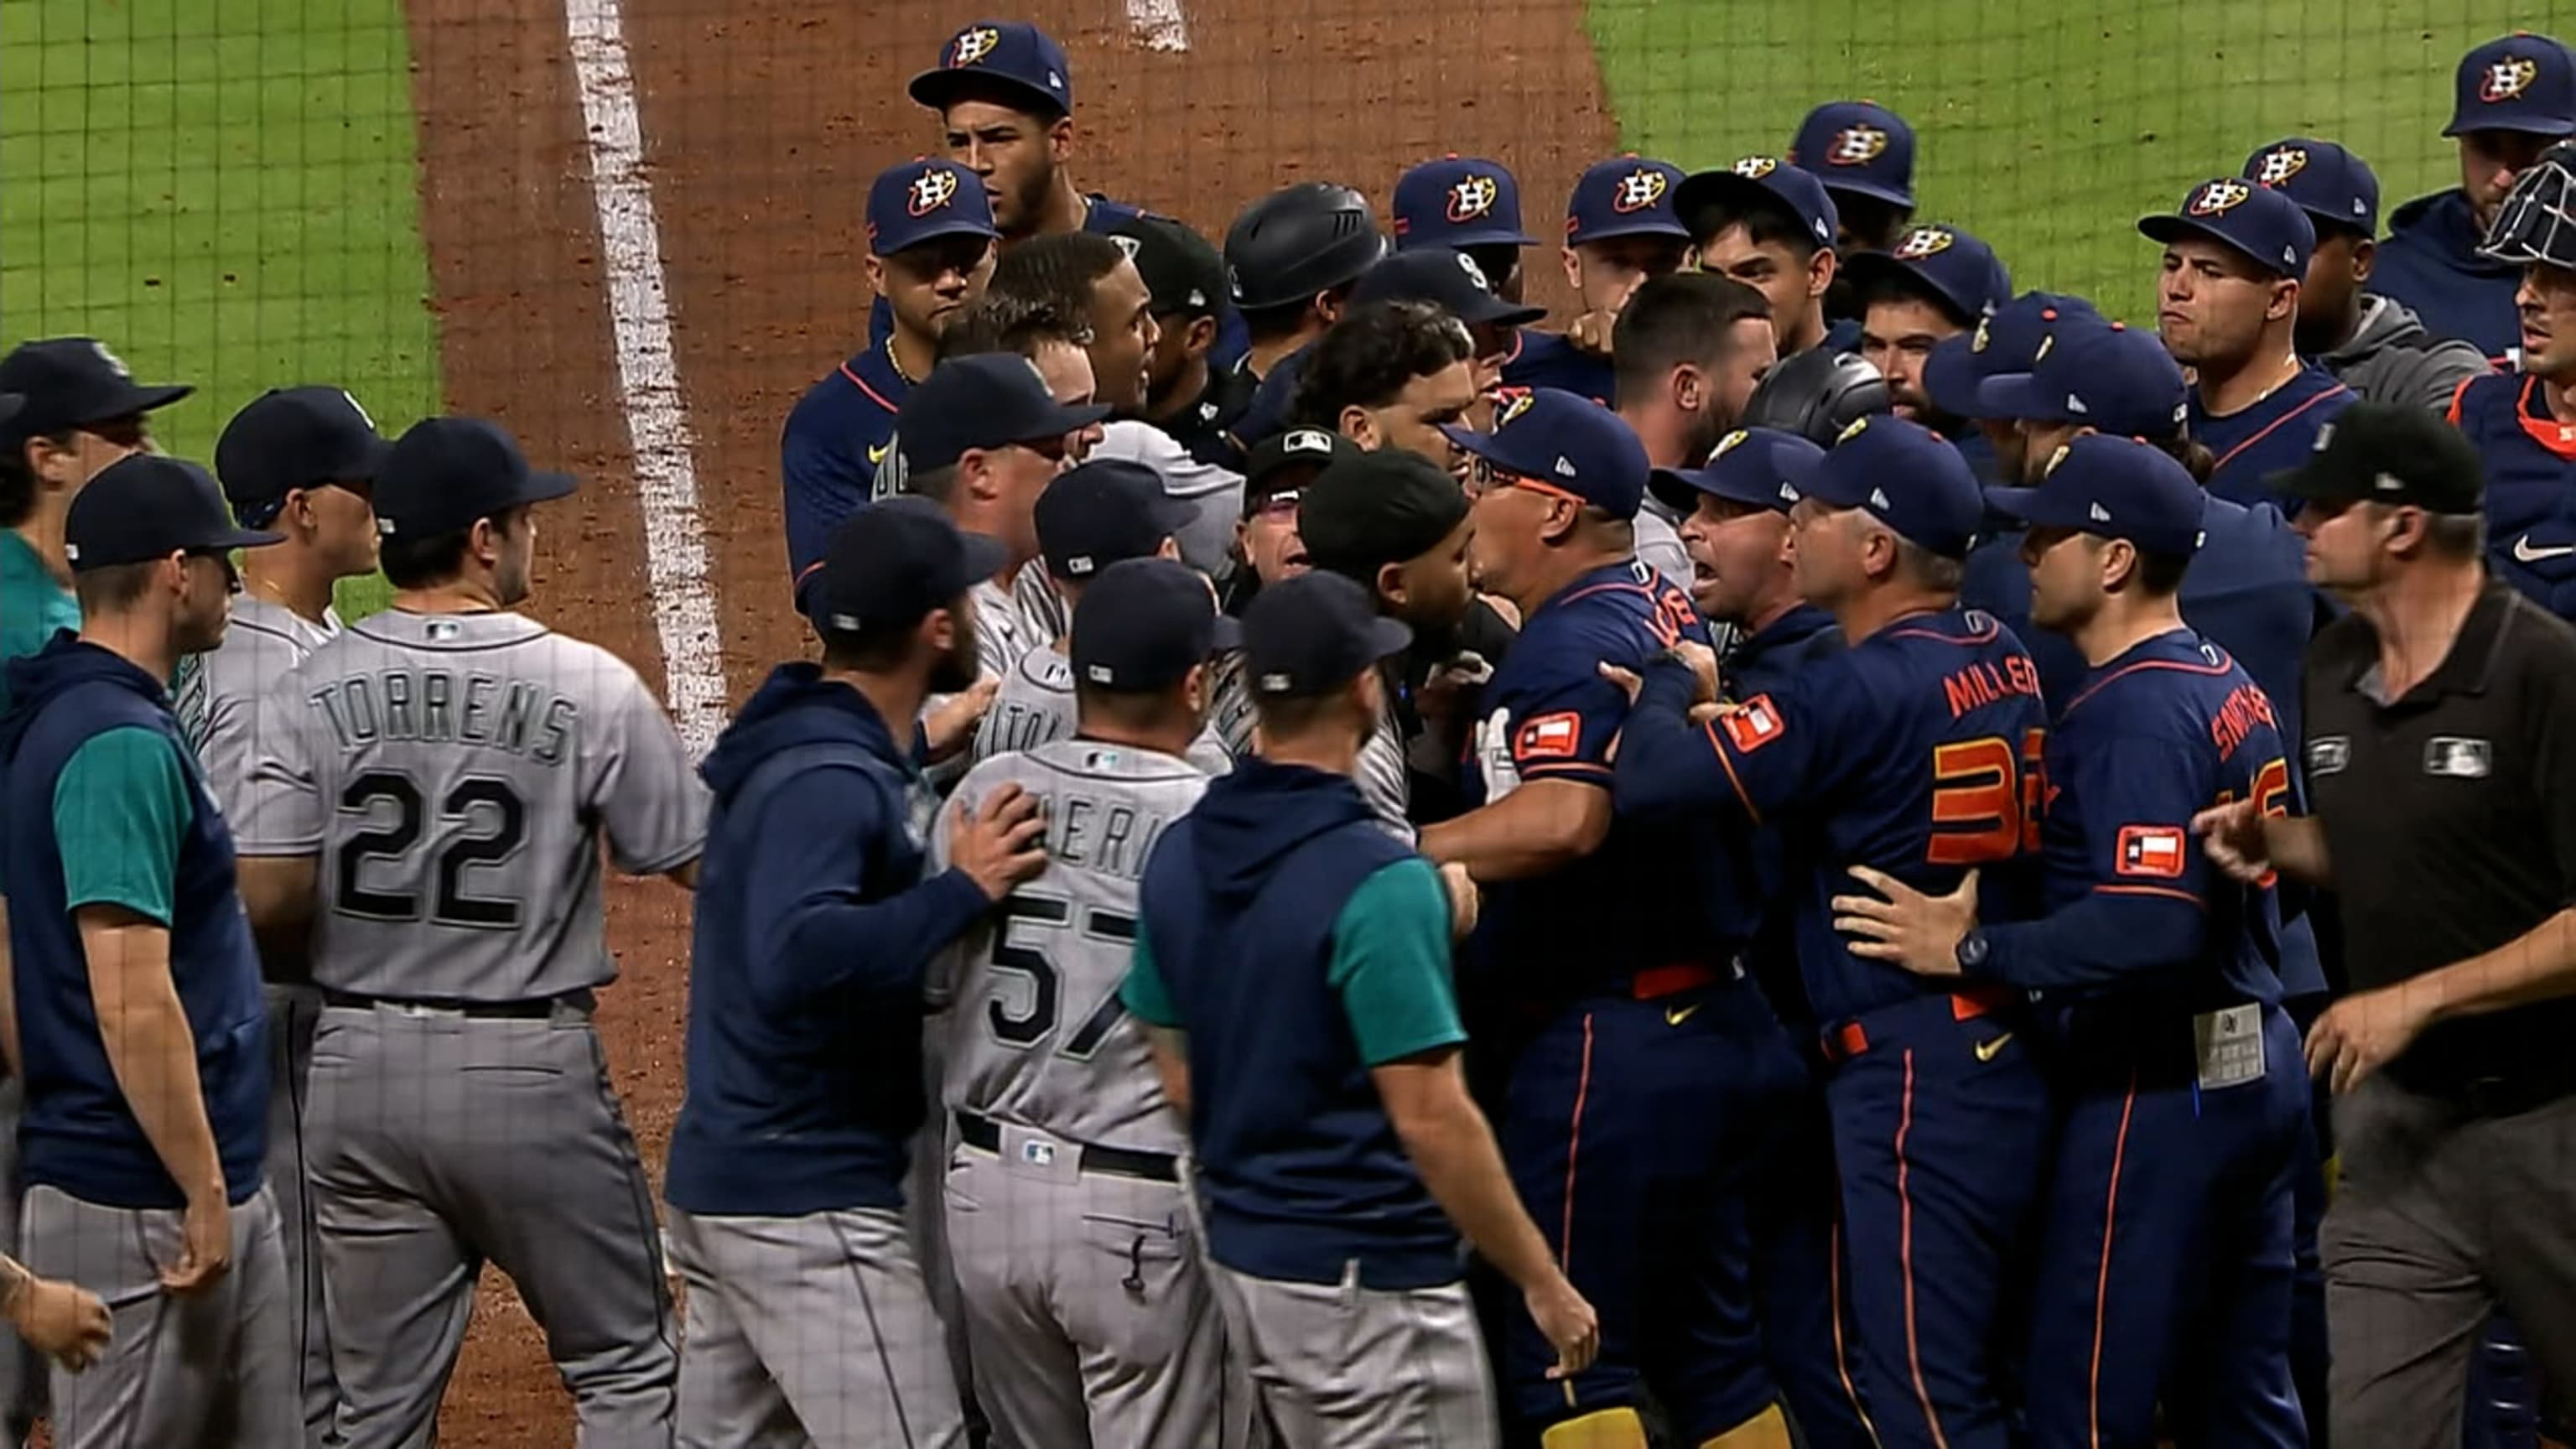 Astros' Neris shouts at Mariners' Rodríguez after strikeout, causing  benches to empty